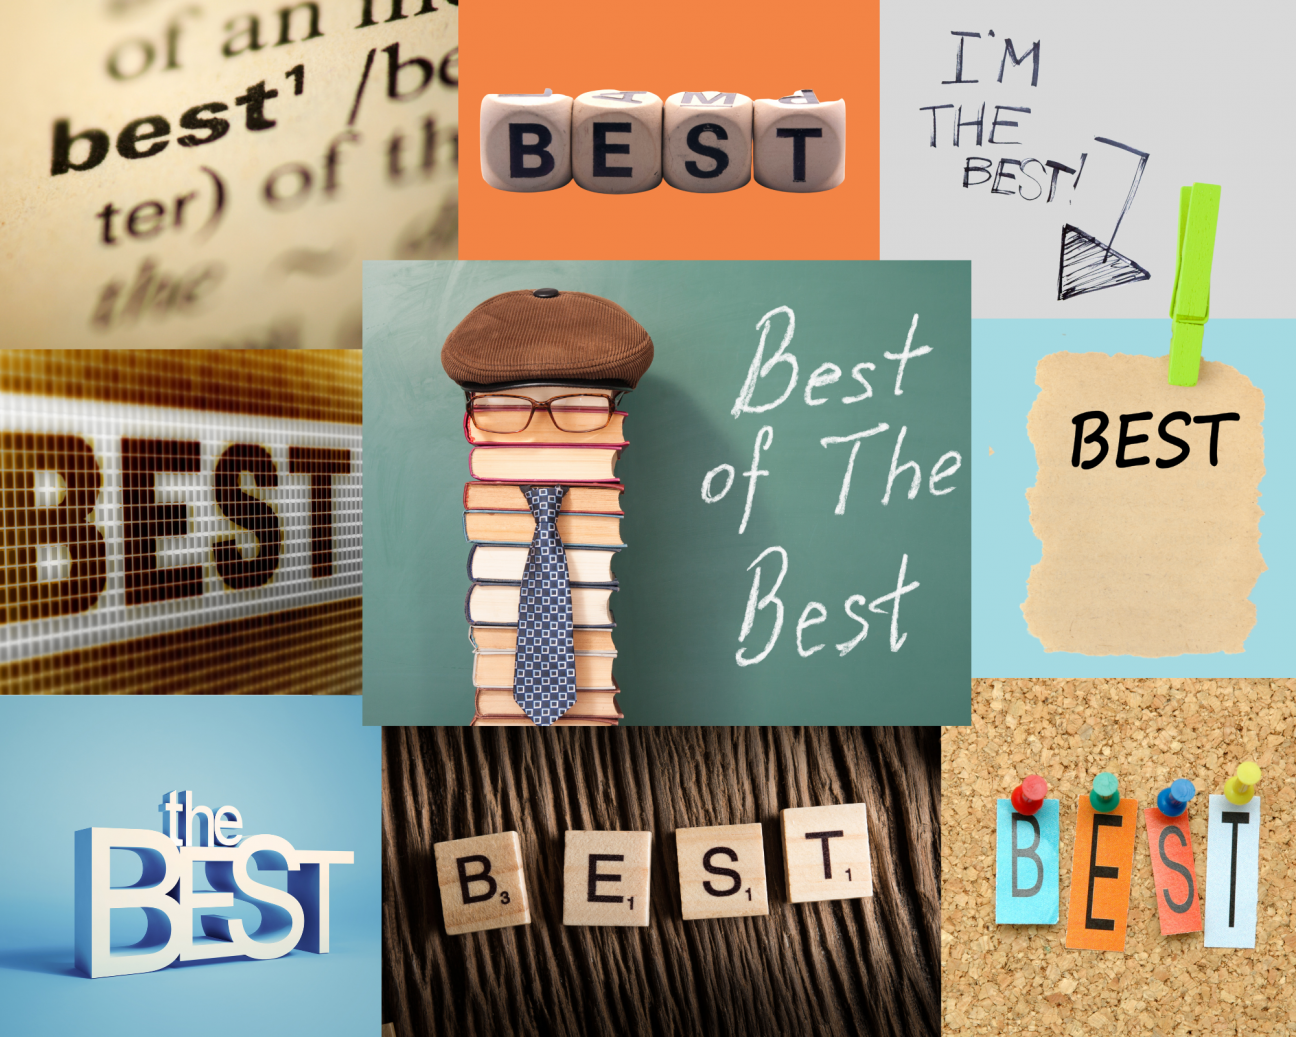 pictures of the word best in a variety of colors and objects, also a stack of books with a hat, glasses and tie with the words best of the best